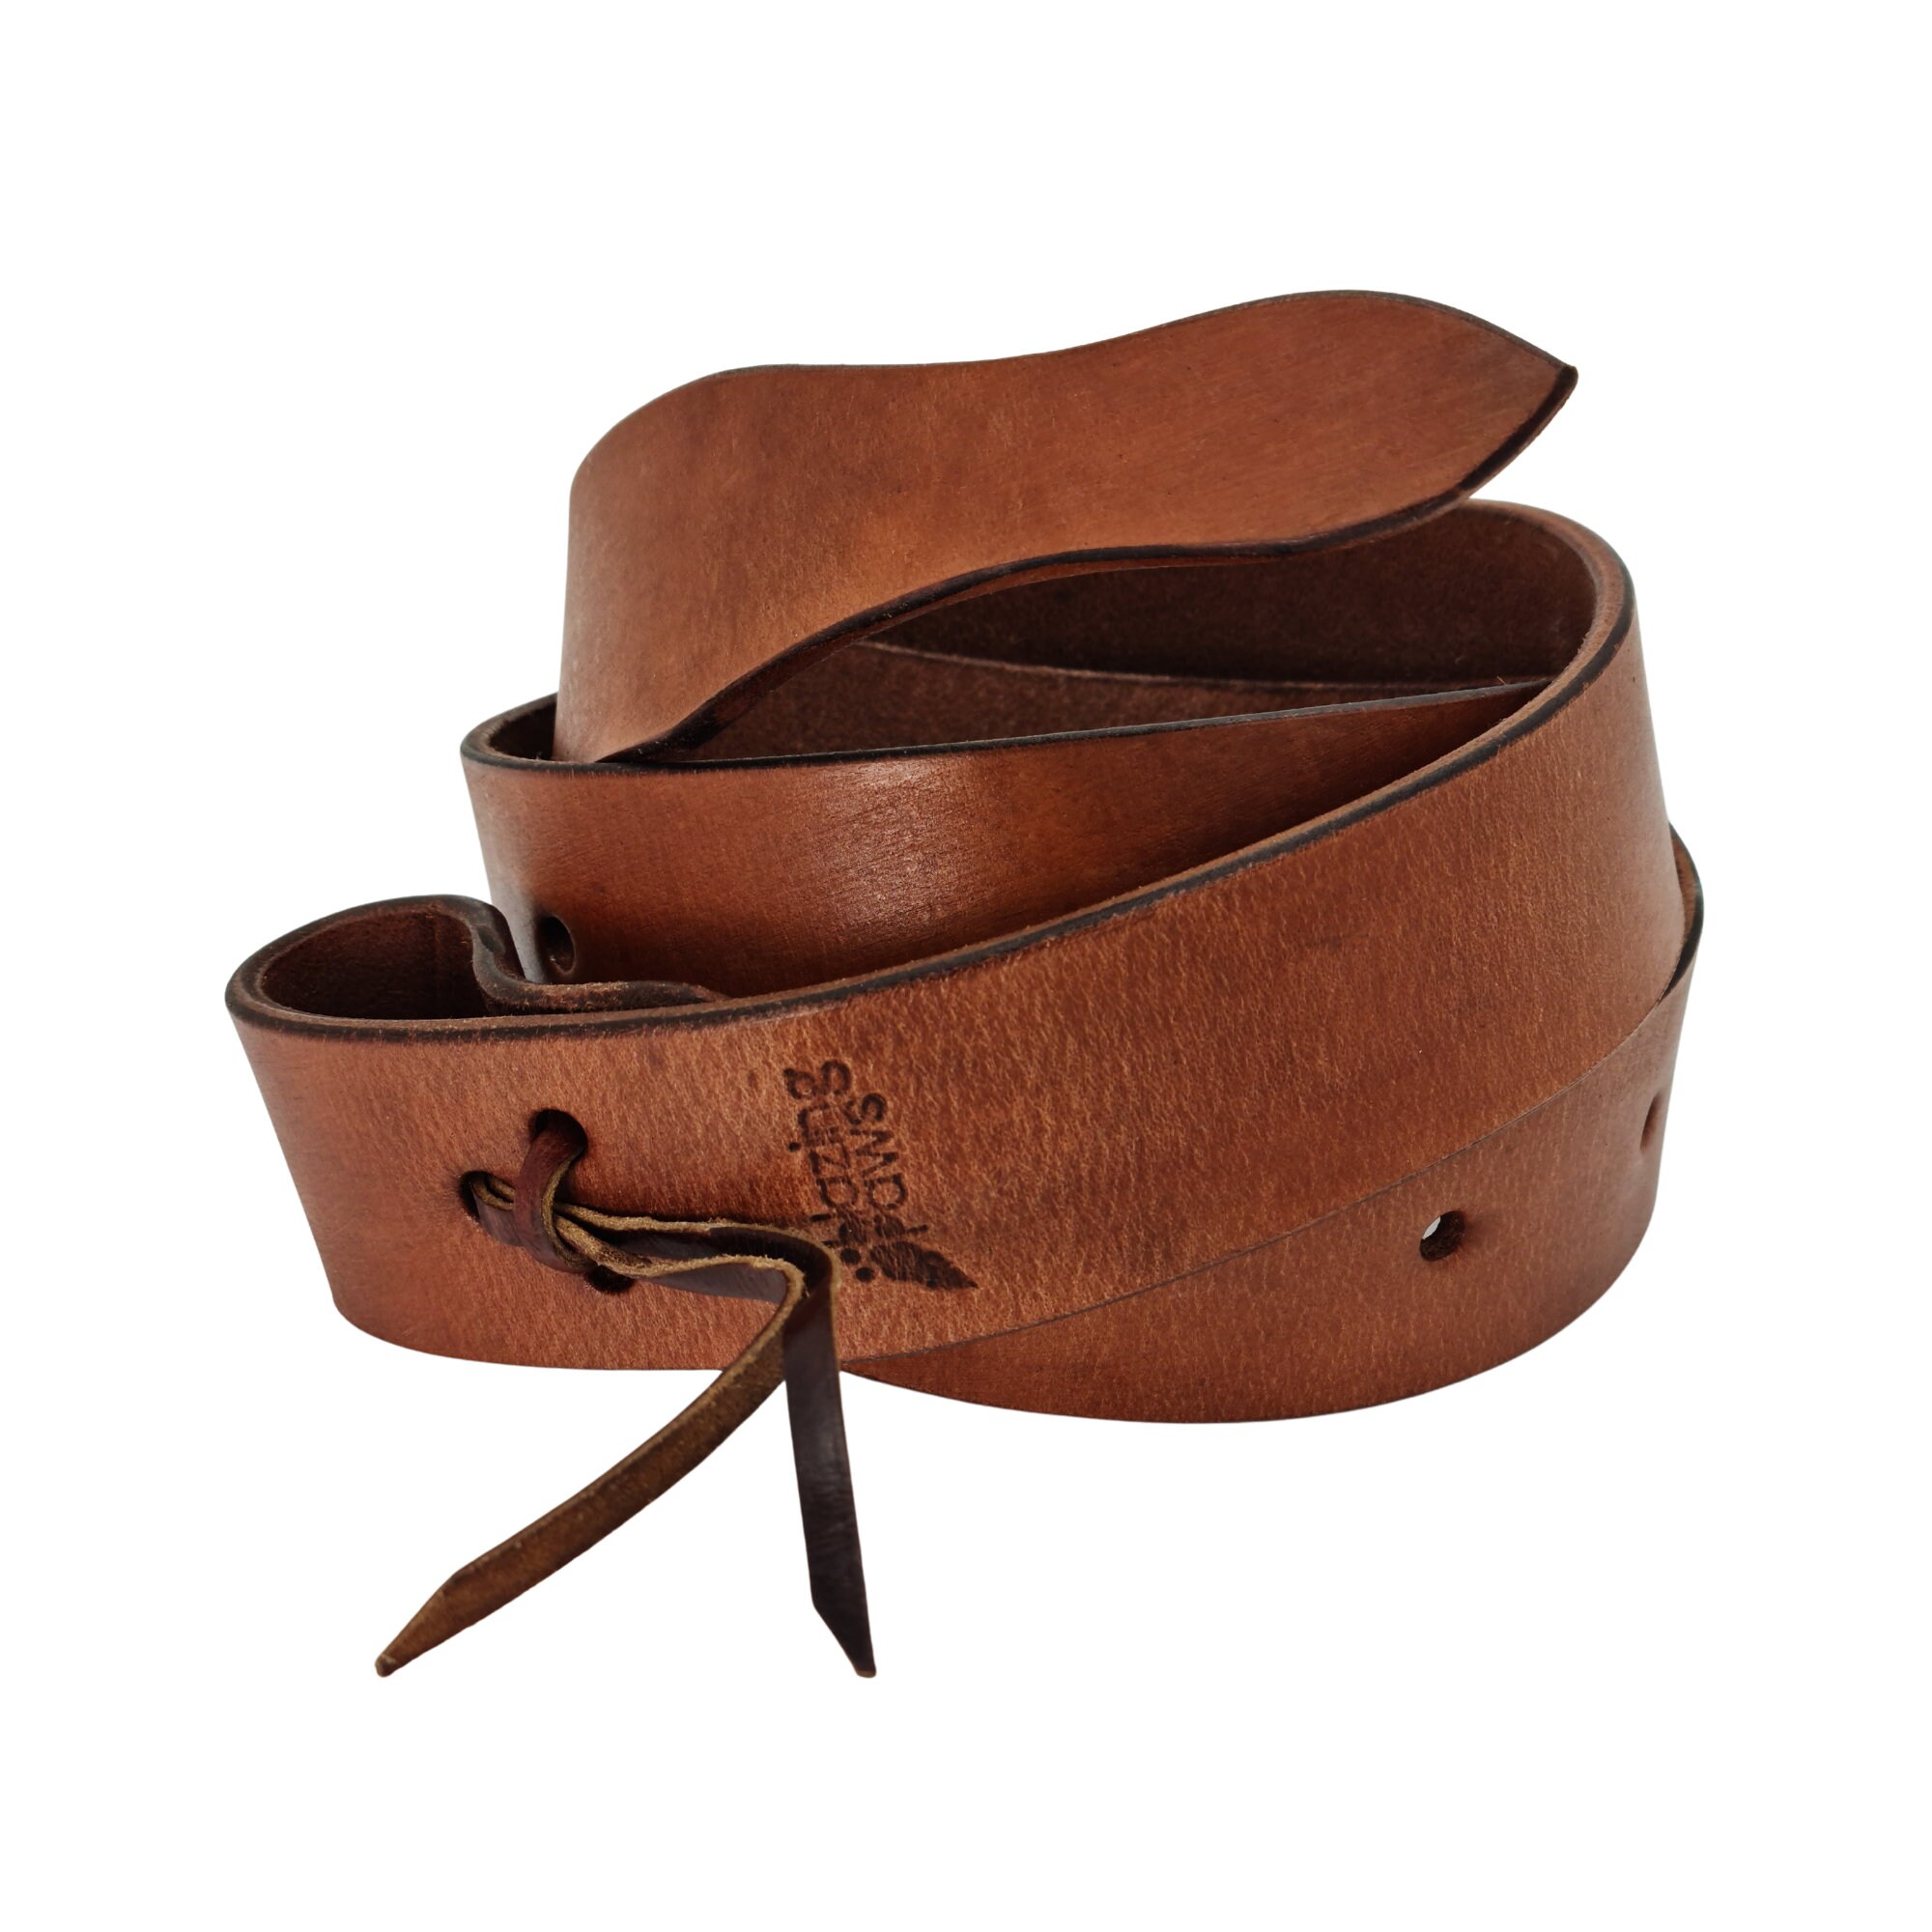 BlazingPaws Premium Harneto Leather 6 Ft Latigo Cinch Saddle Strap with or without Holes in Hand Died Top Grain Heavyweight Leather